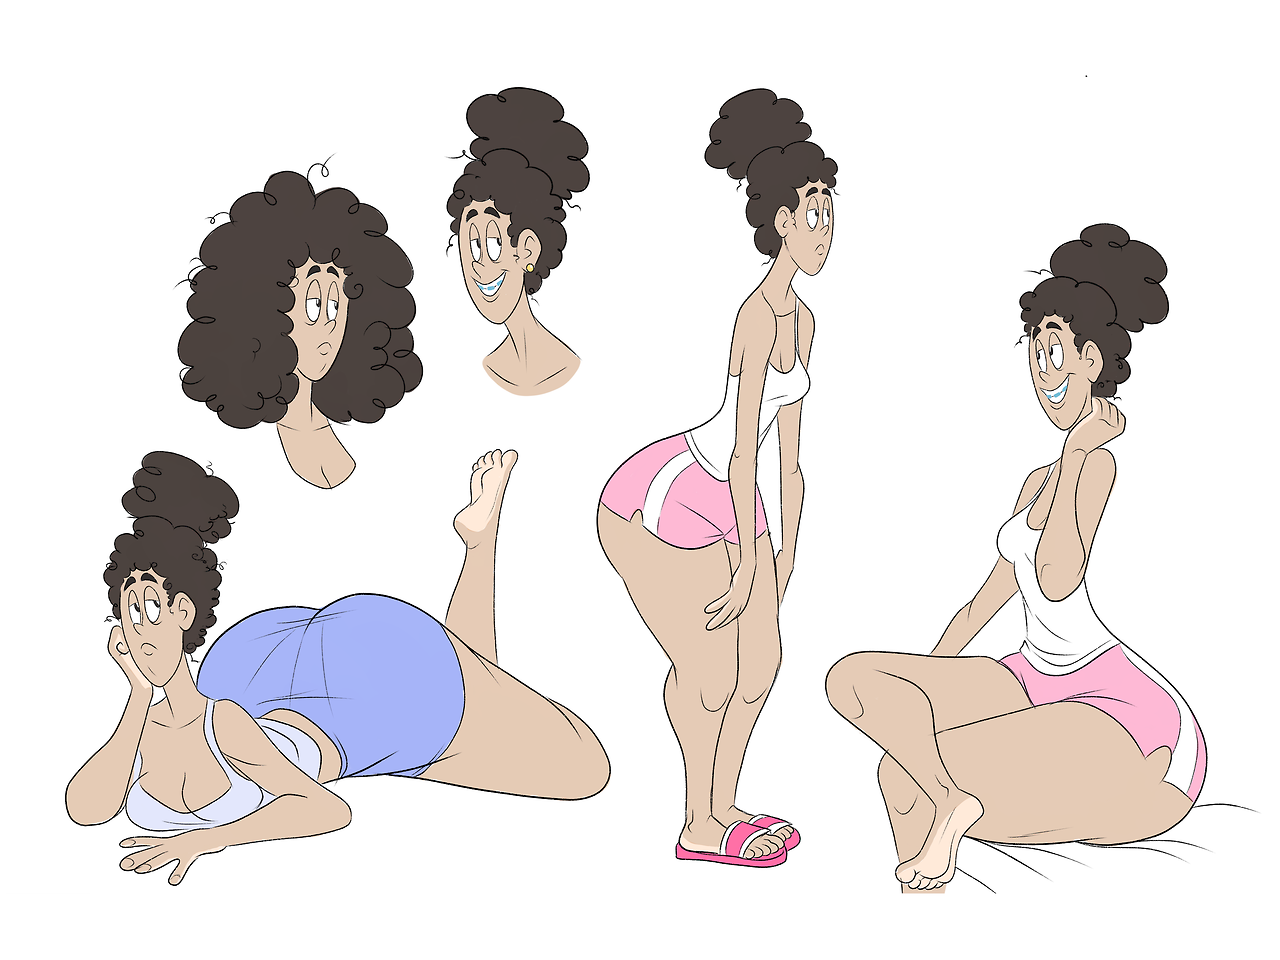 safeforwappah: More doodles of that dream girl I’ll name her Adele for now.  I’d